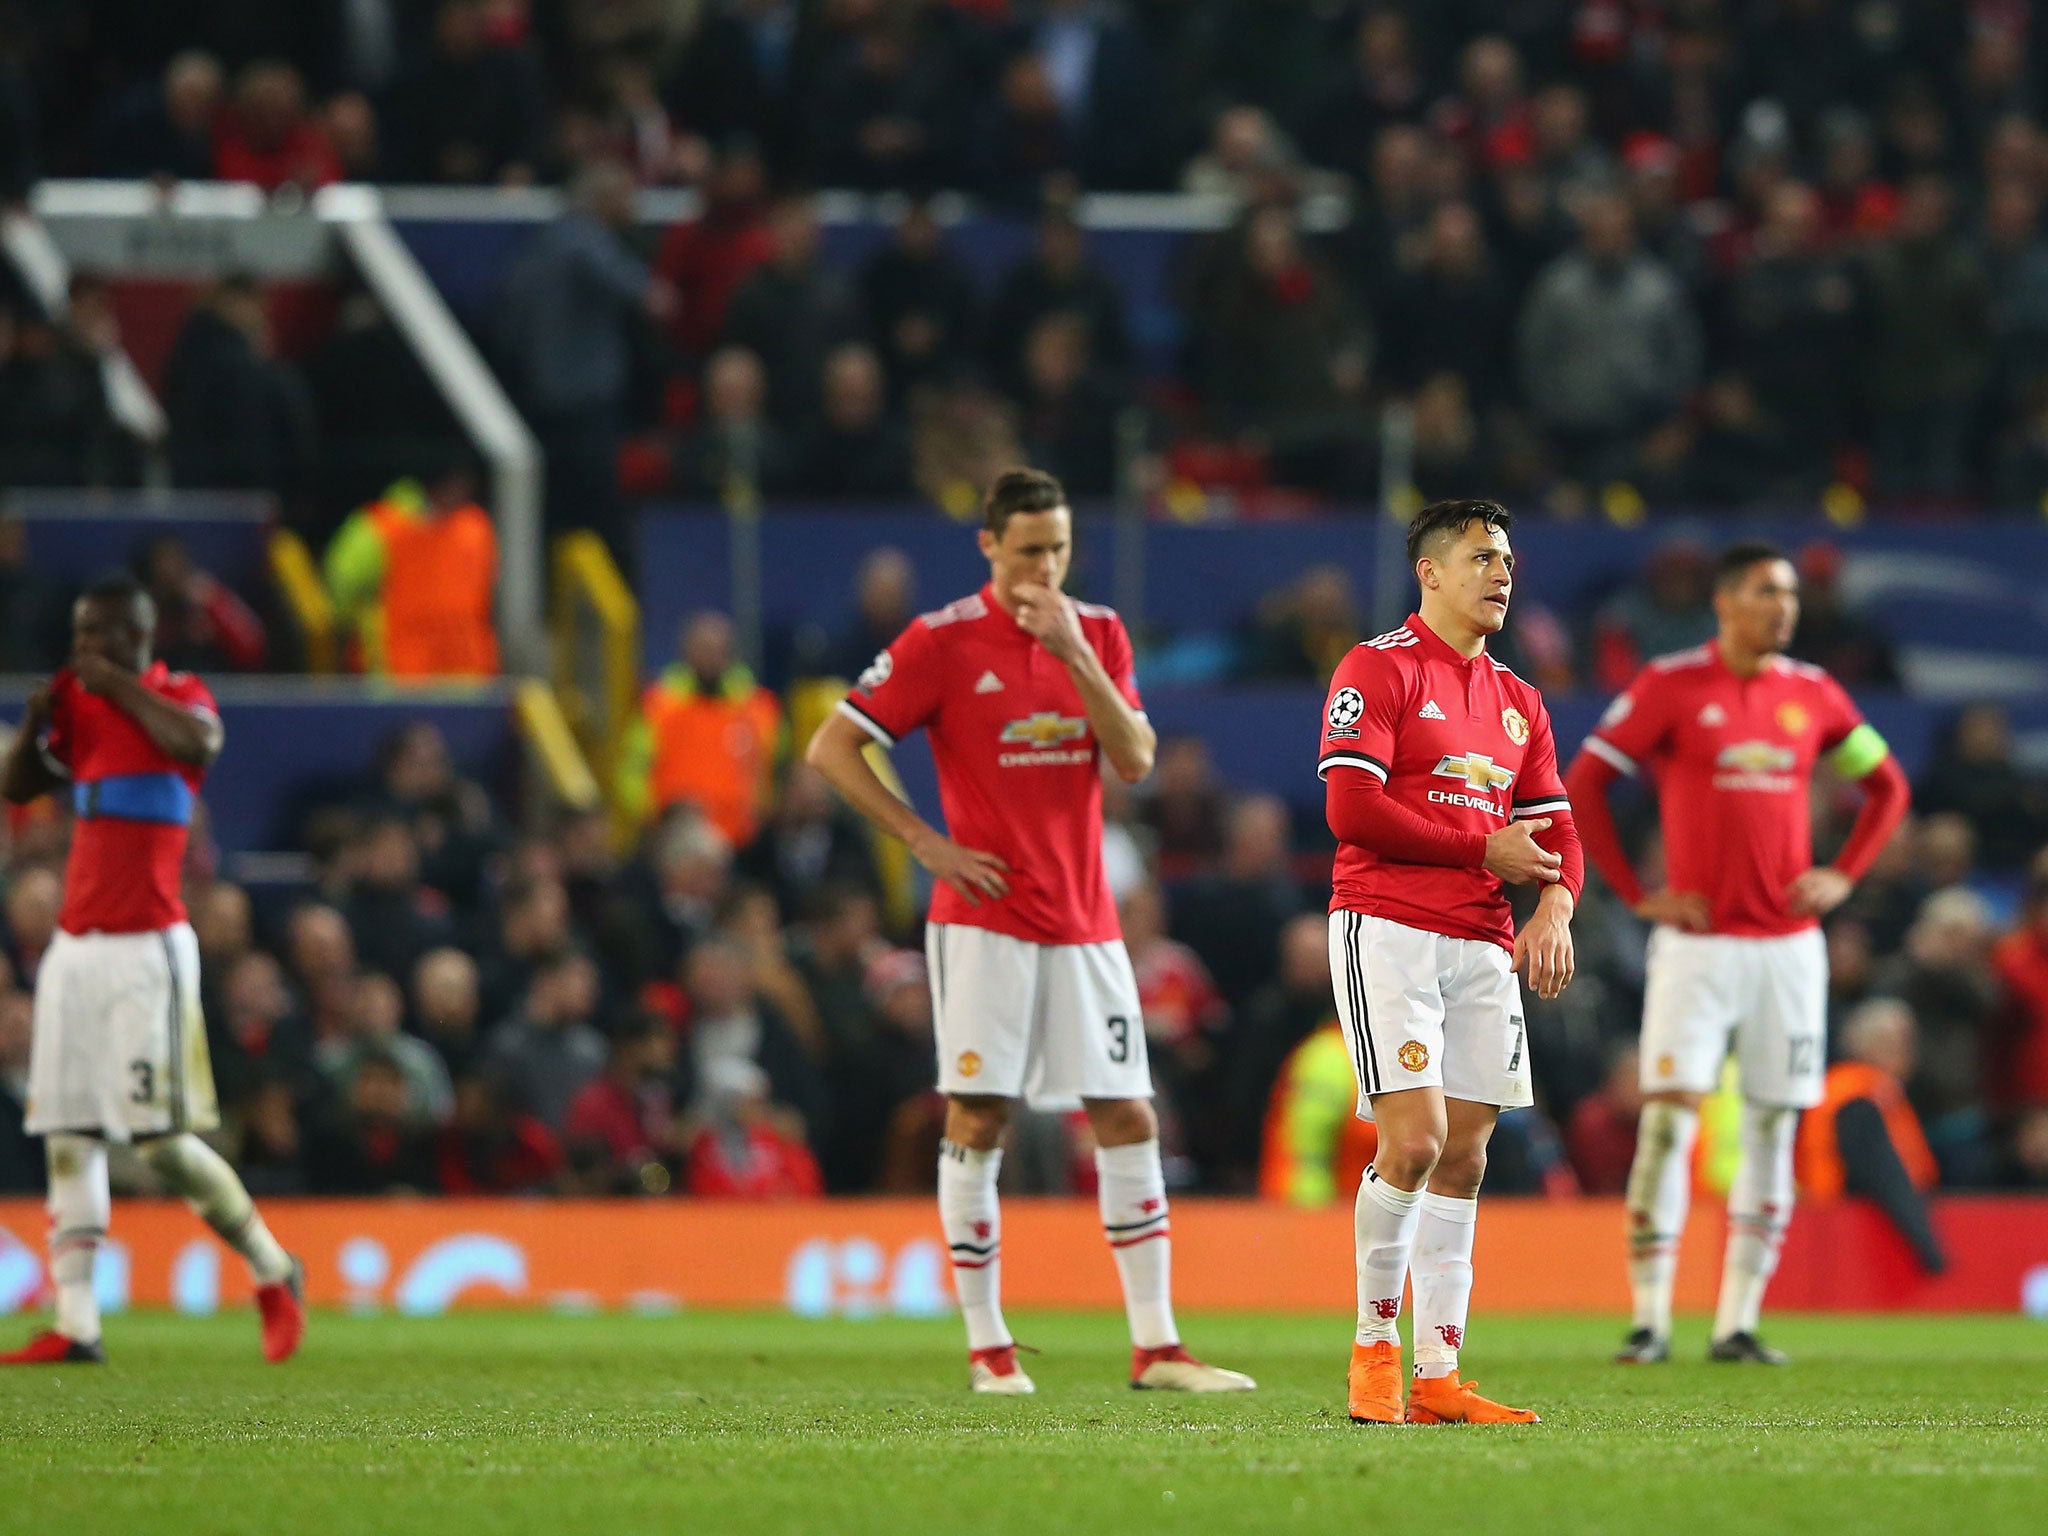 United's players react after their surprise defeat at Old Trafford